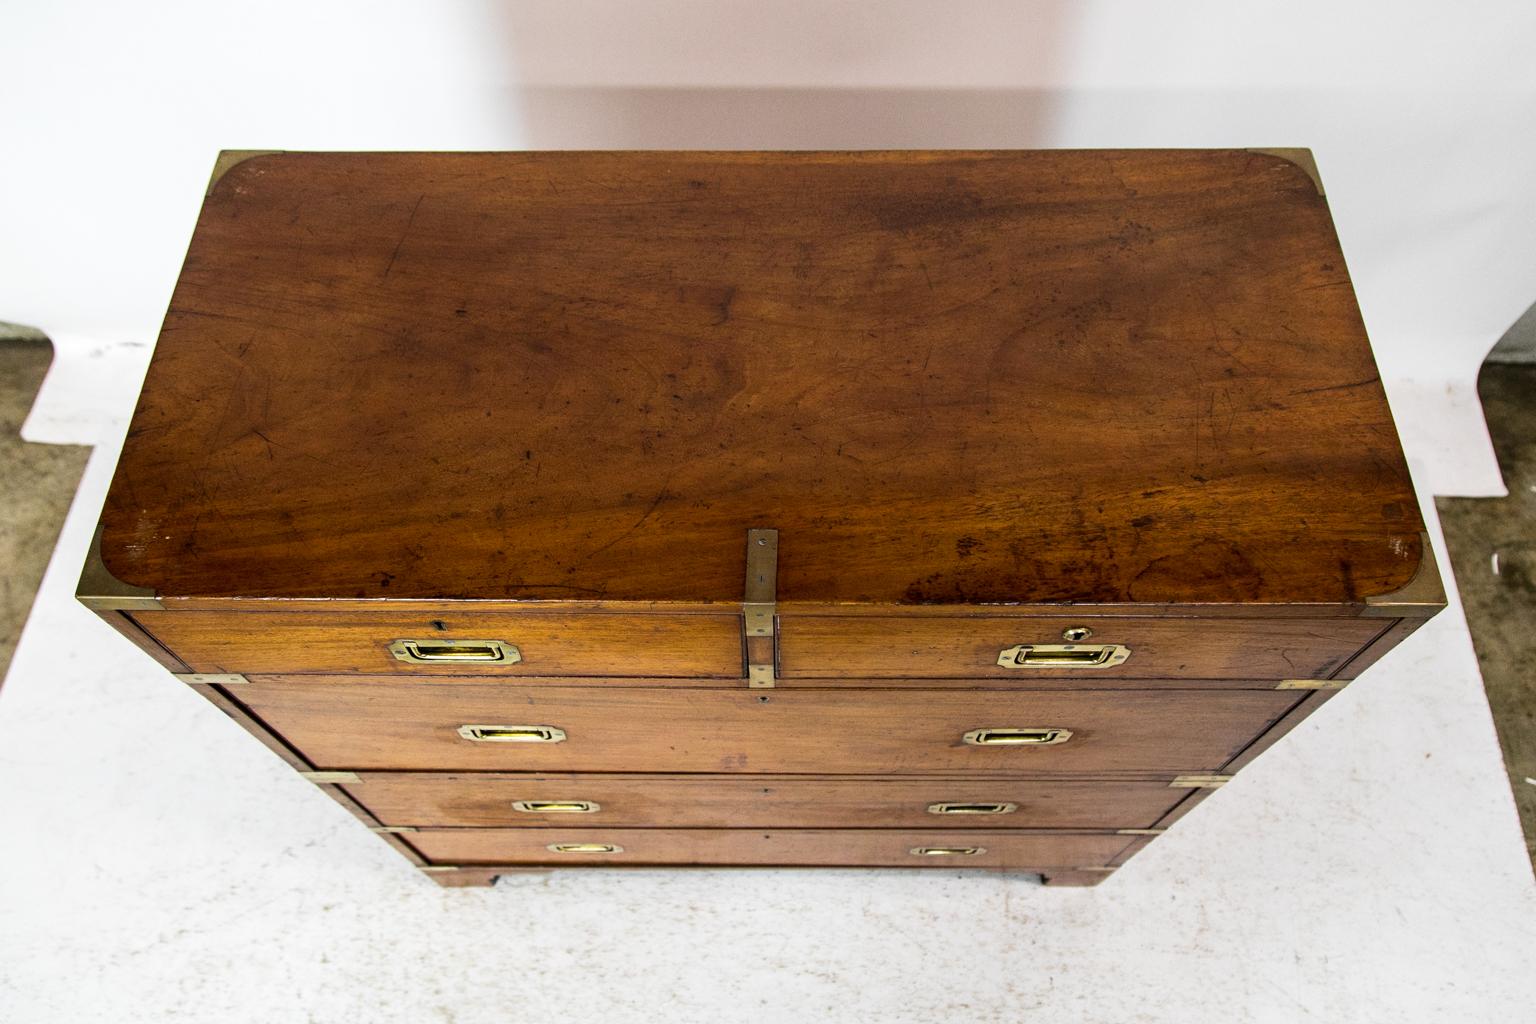 This Campaign chest has the original flush brass hardware in the corners. The drawers have incised cockbeaded edges. The chest comes in its original two sections. All of the original locks are present except for the top right drawer.
   